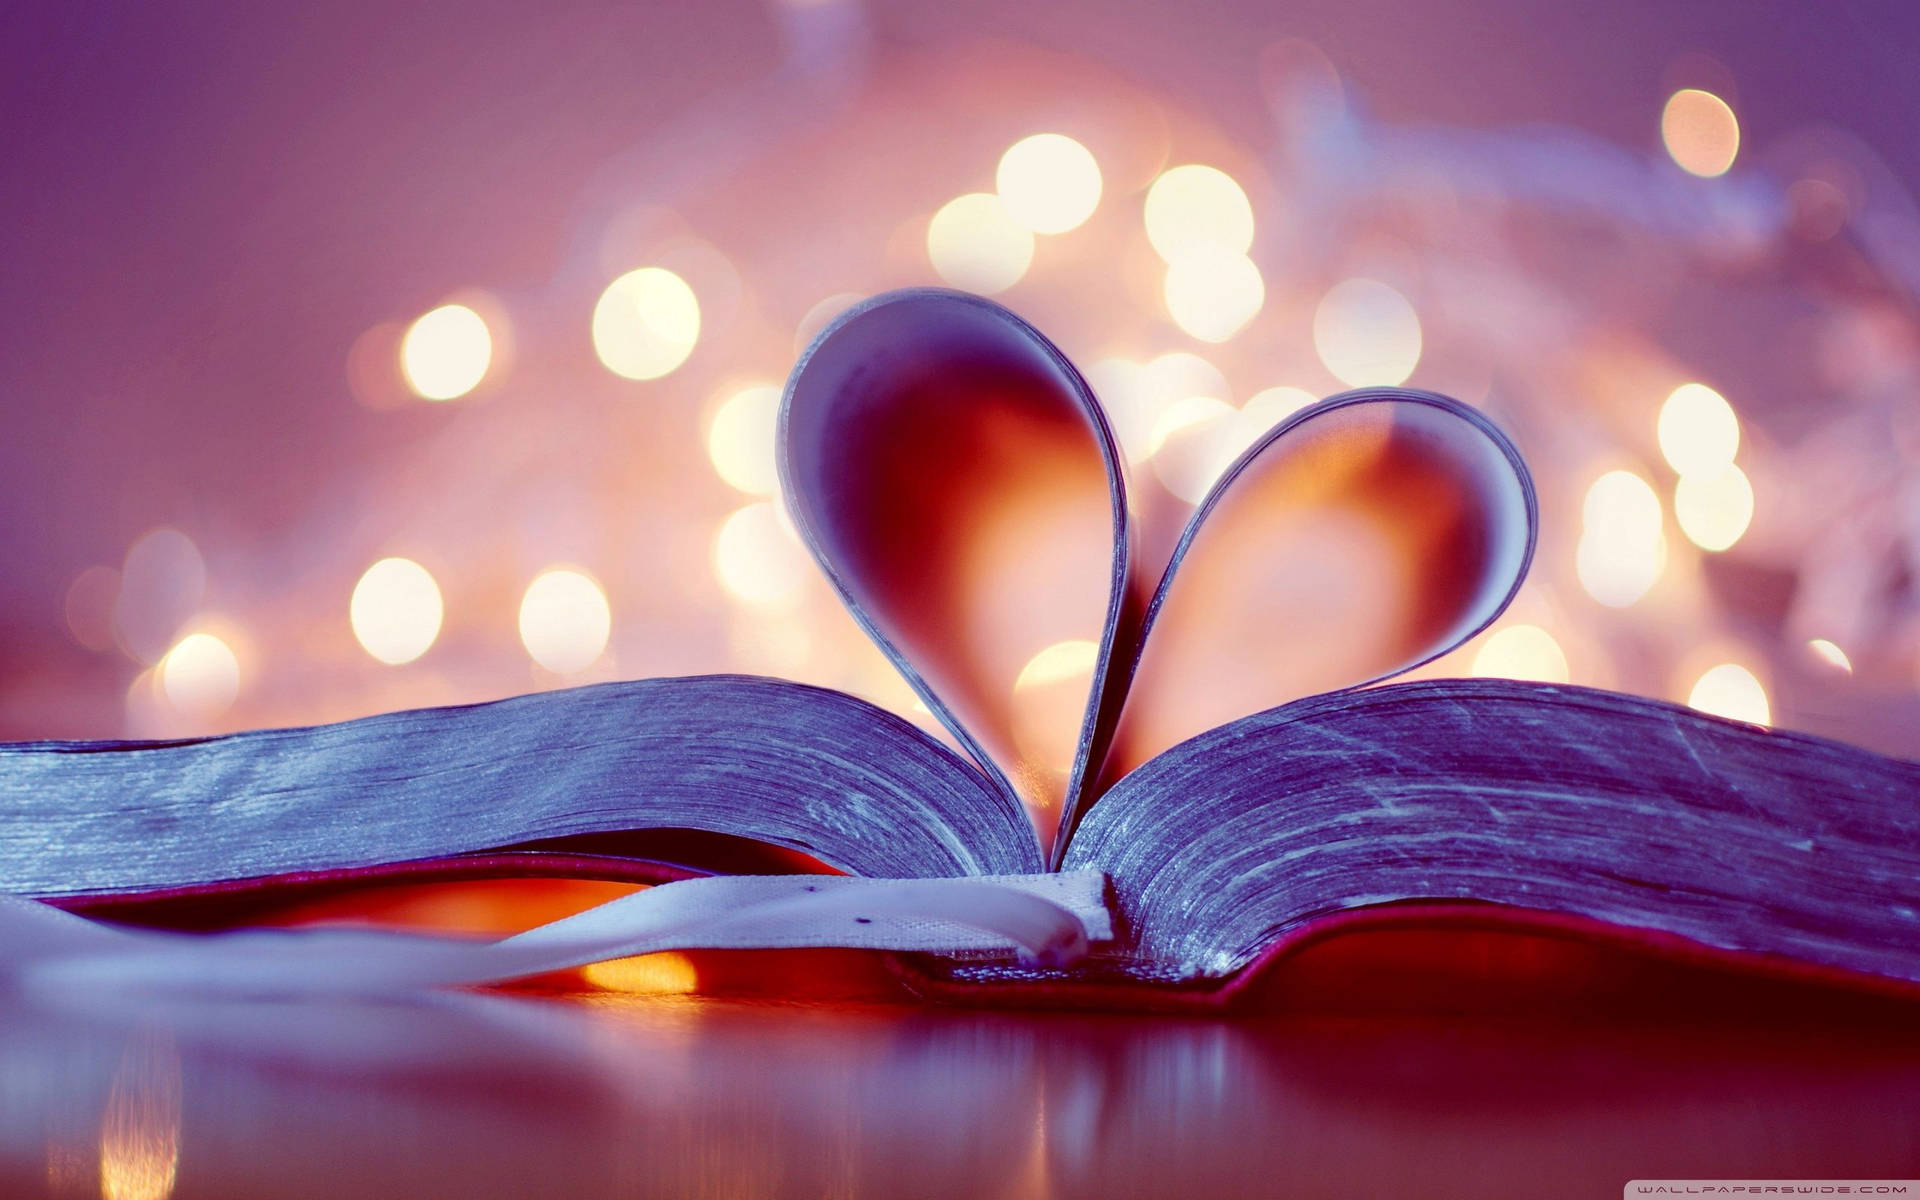 Dreamy lights and heart-shaped pages of a book wallpaper